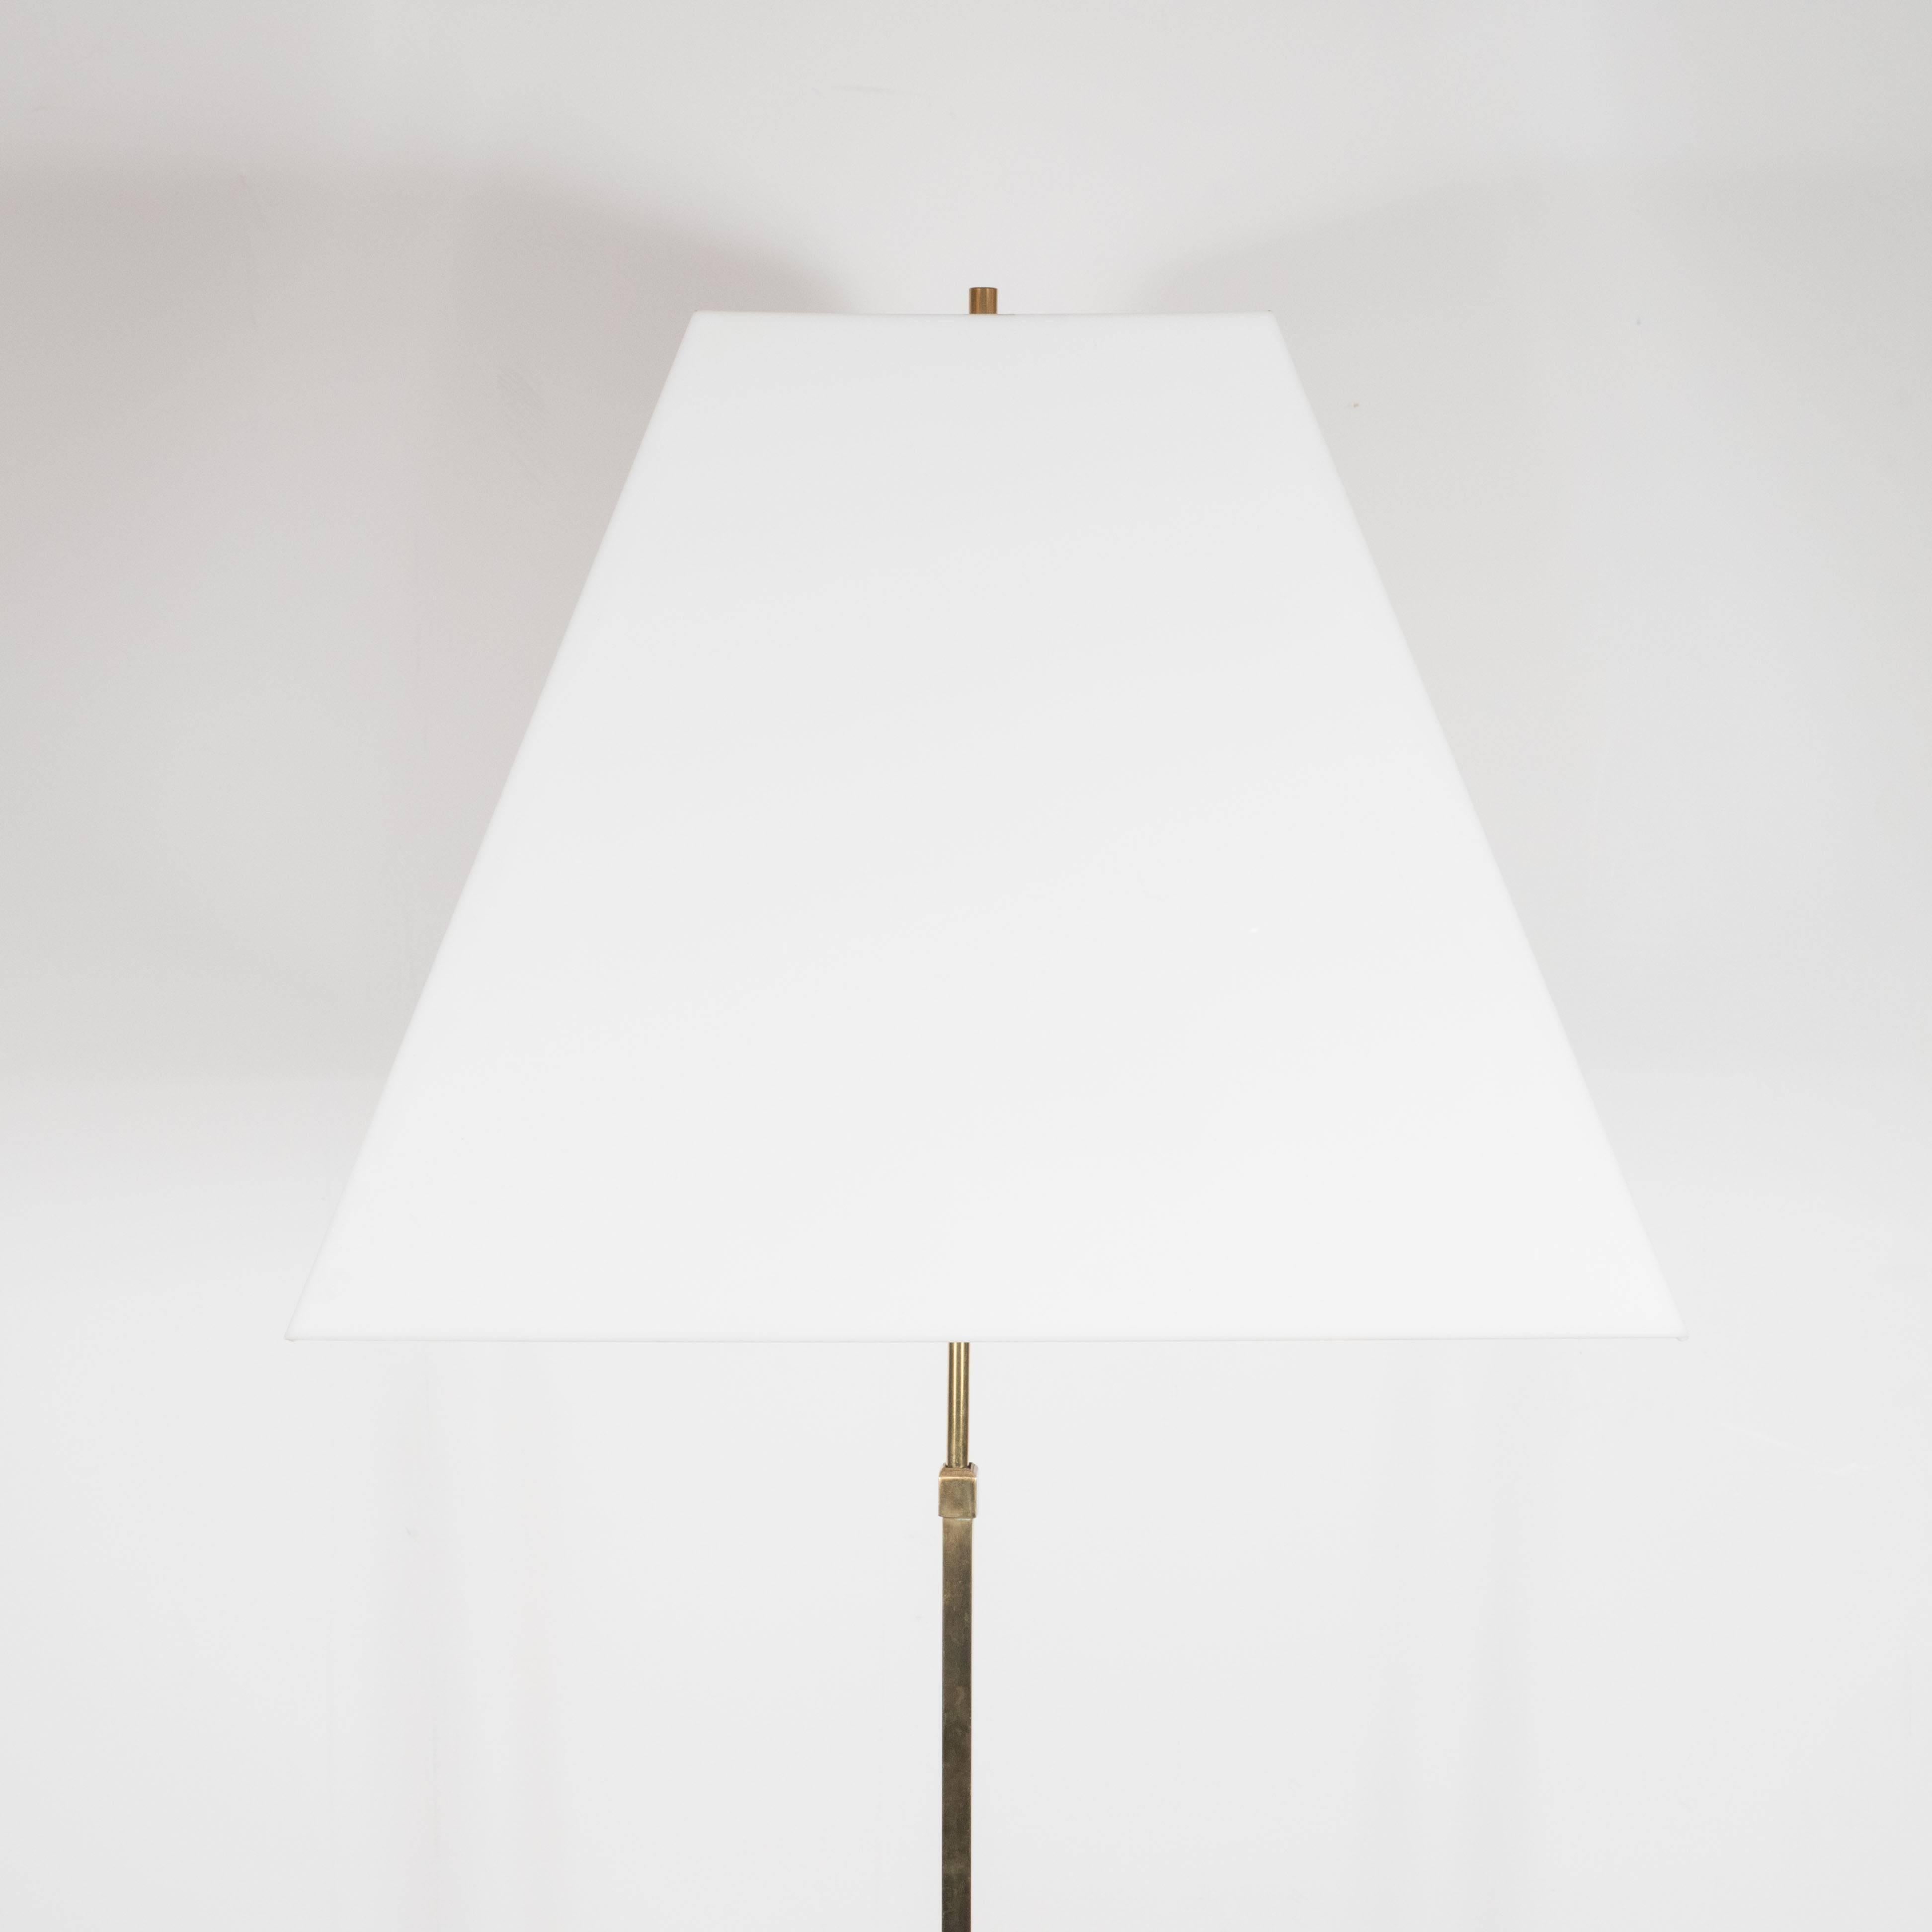 This sophisticated Mid-Century Modernist boasts a diamond base with sunburst detailing in polished brass. The stem features a stepped skyscraper design, supporting a custom white Lucite shade with original brass finial. It has been completely